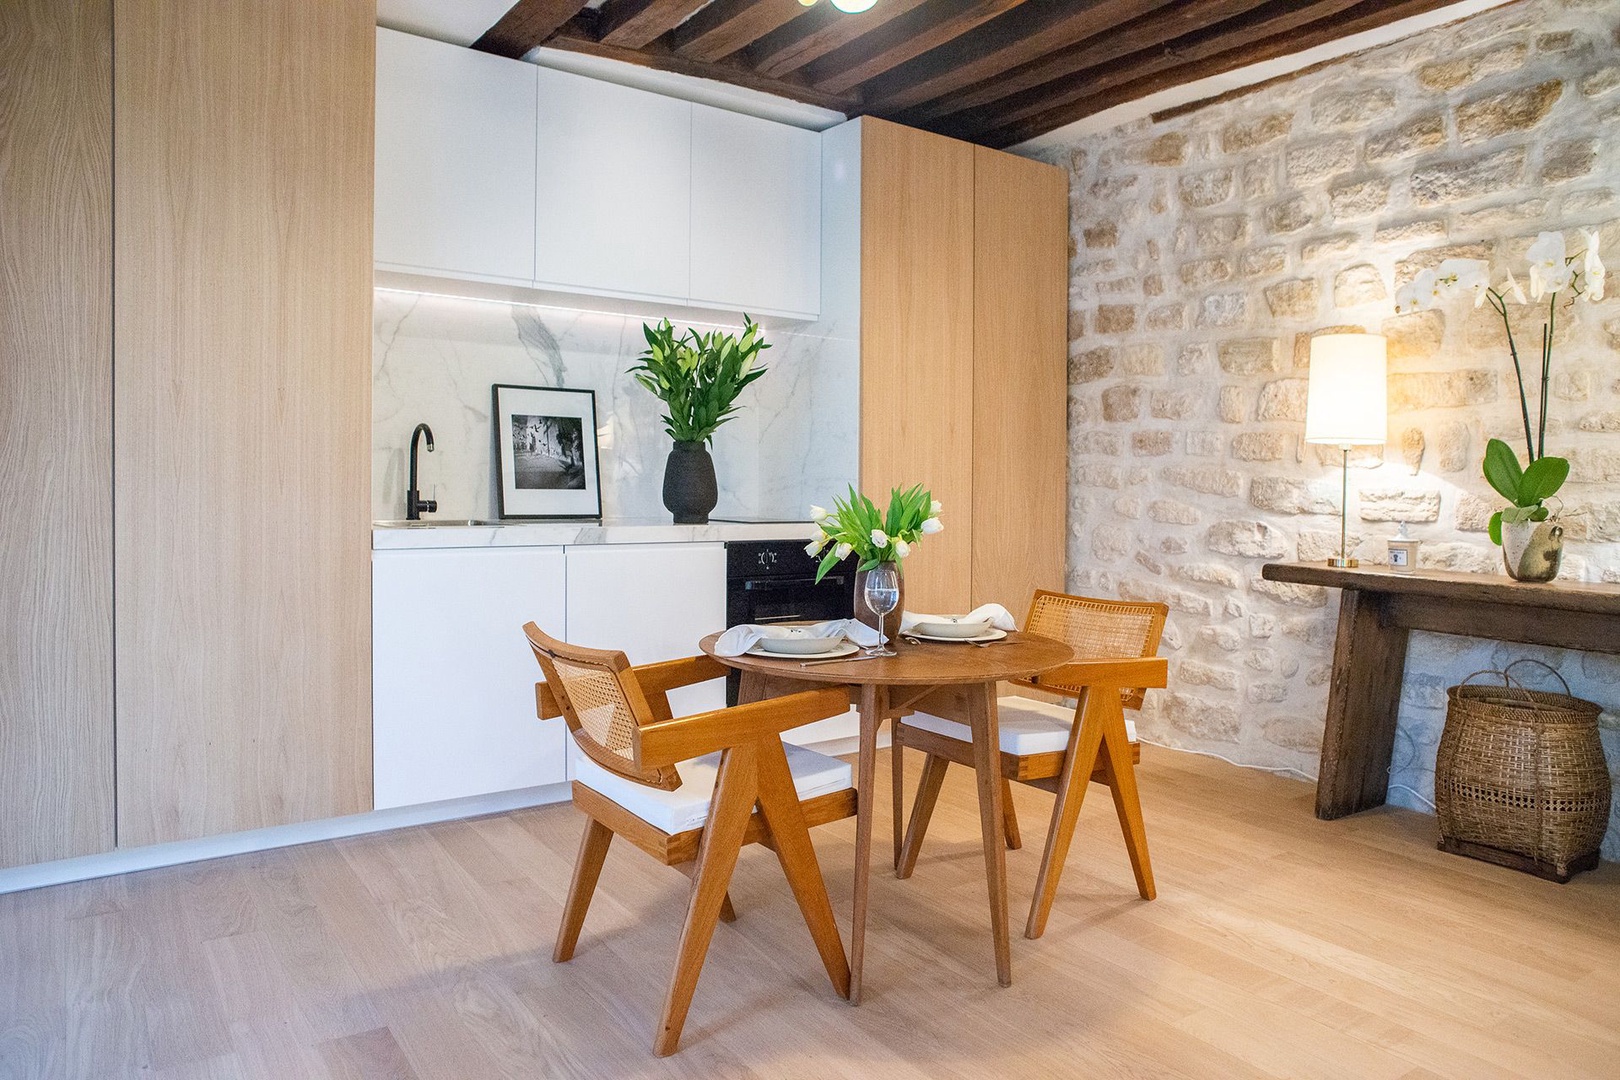 Have casual meals at home in your Parisian apartment.